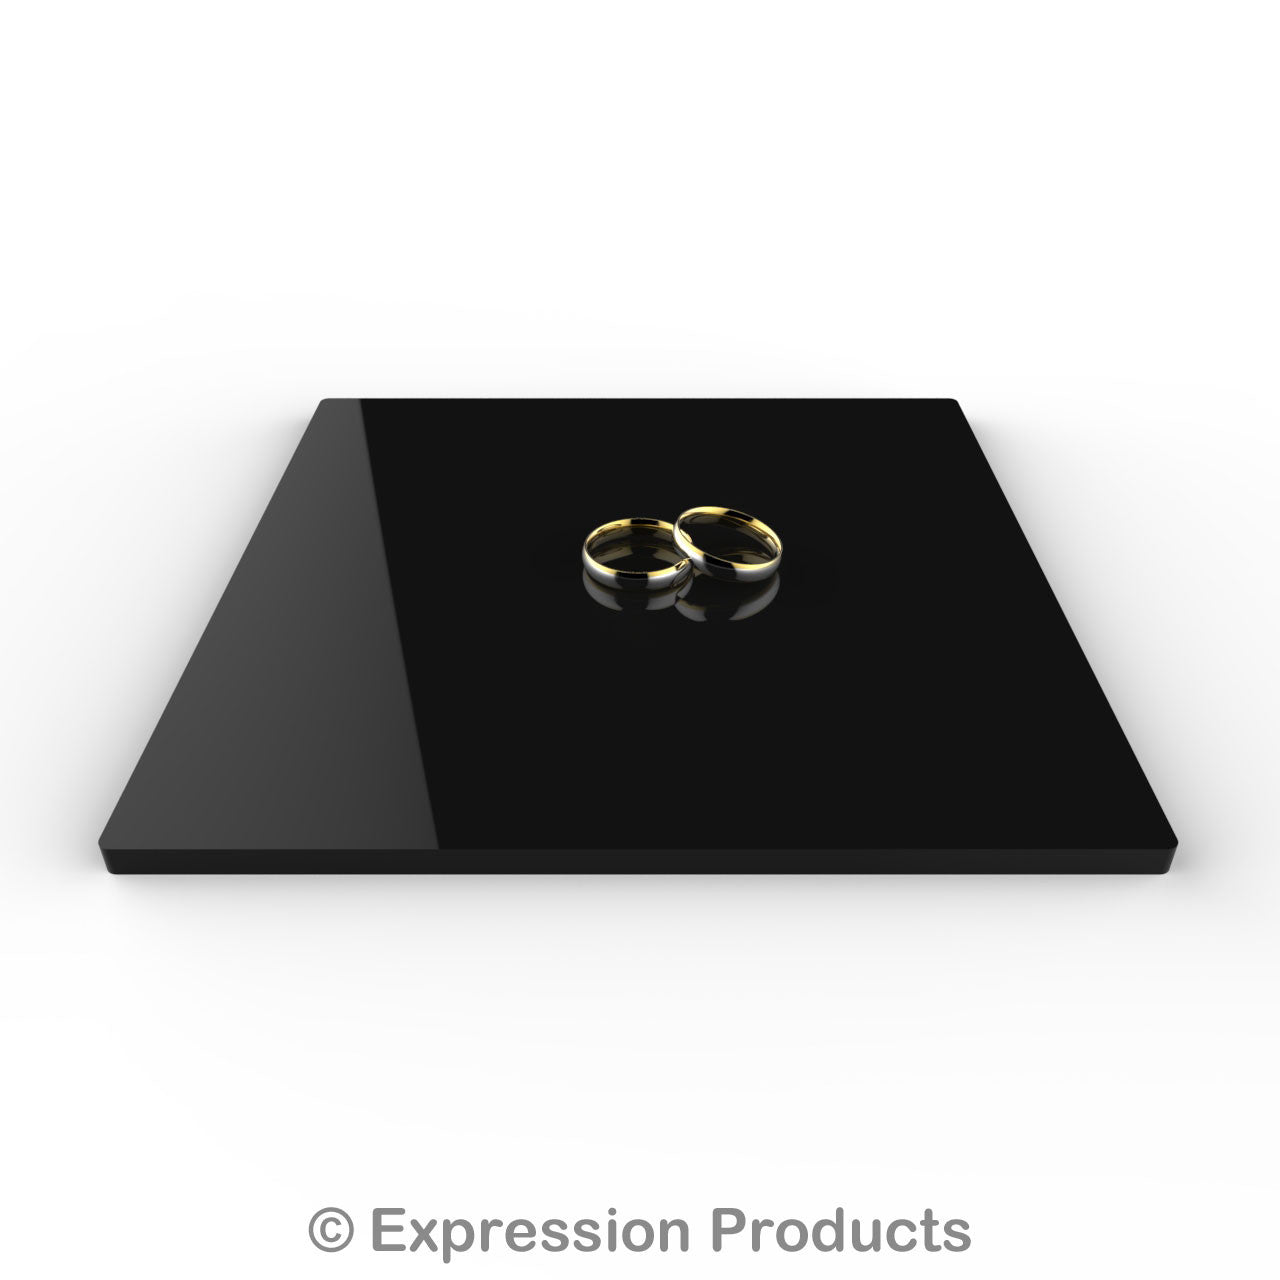 Square Black Acrylic Cake Display Board 4" - 18" - Expression Products Ltd